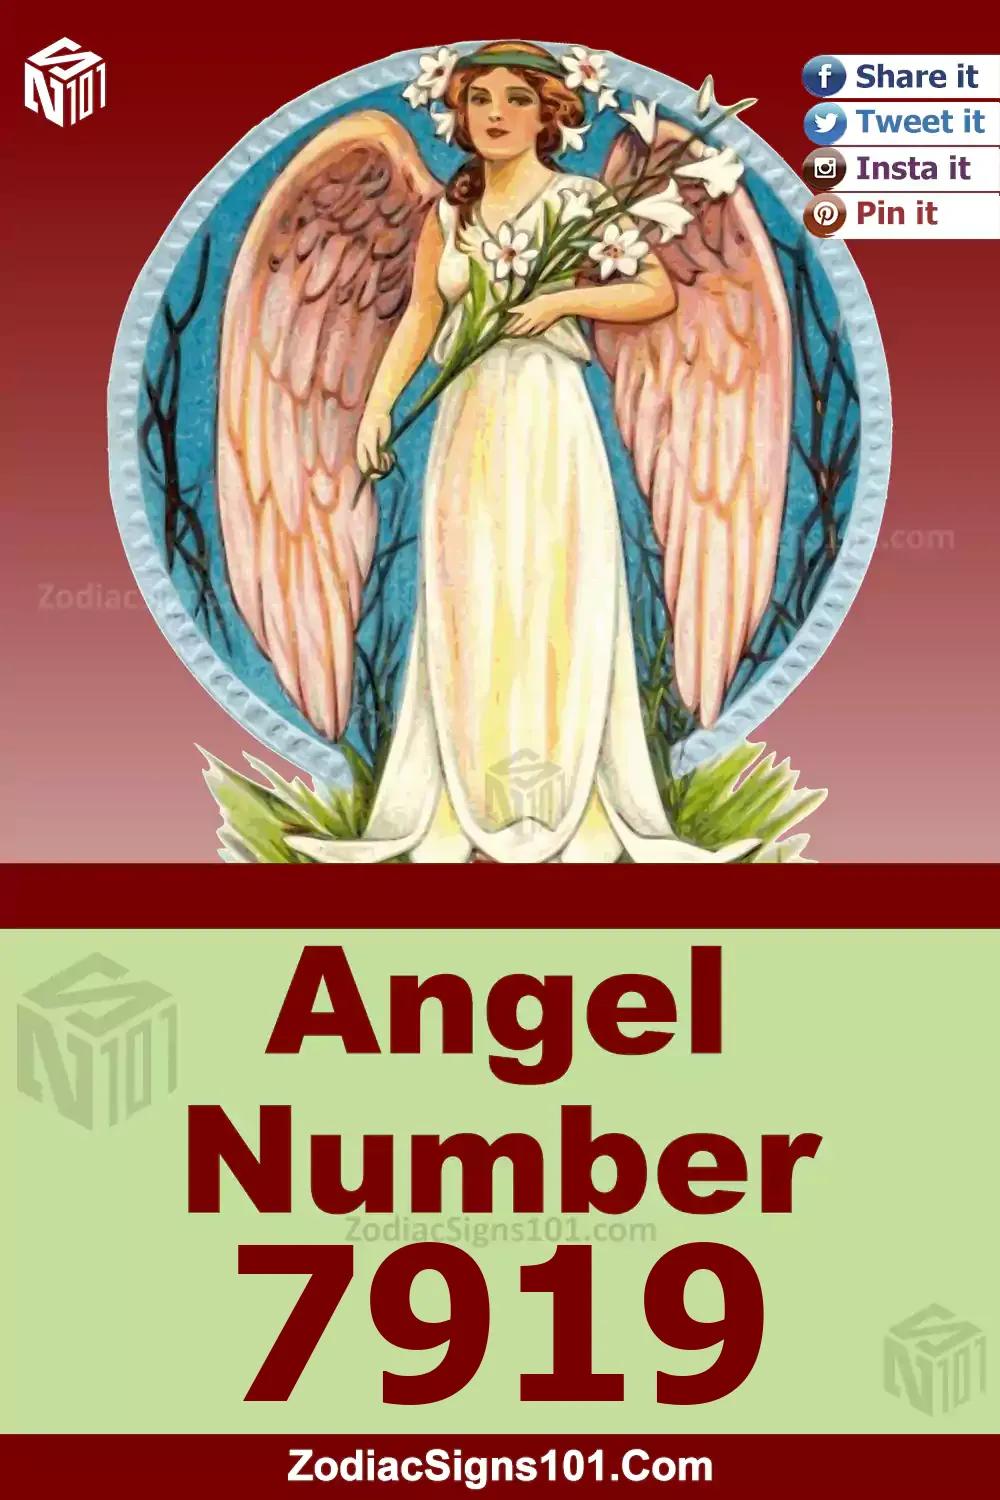 7919 Angel Number Meaning